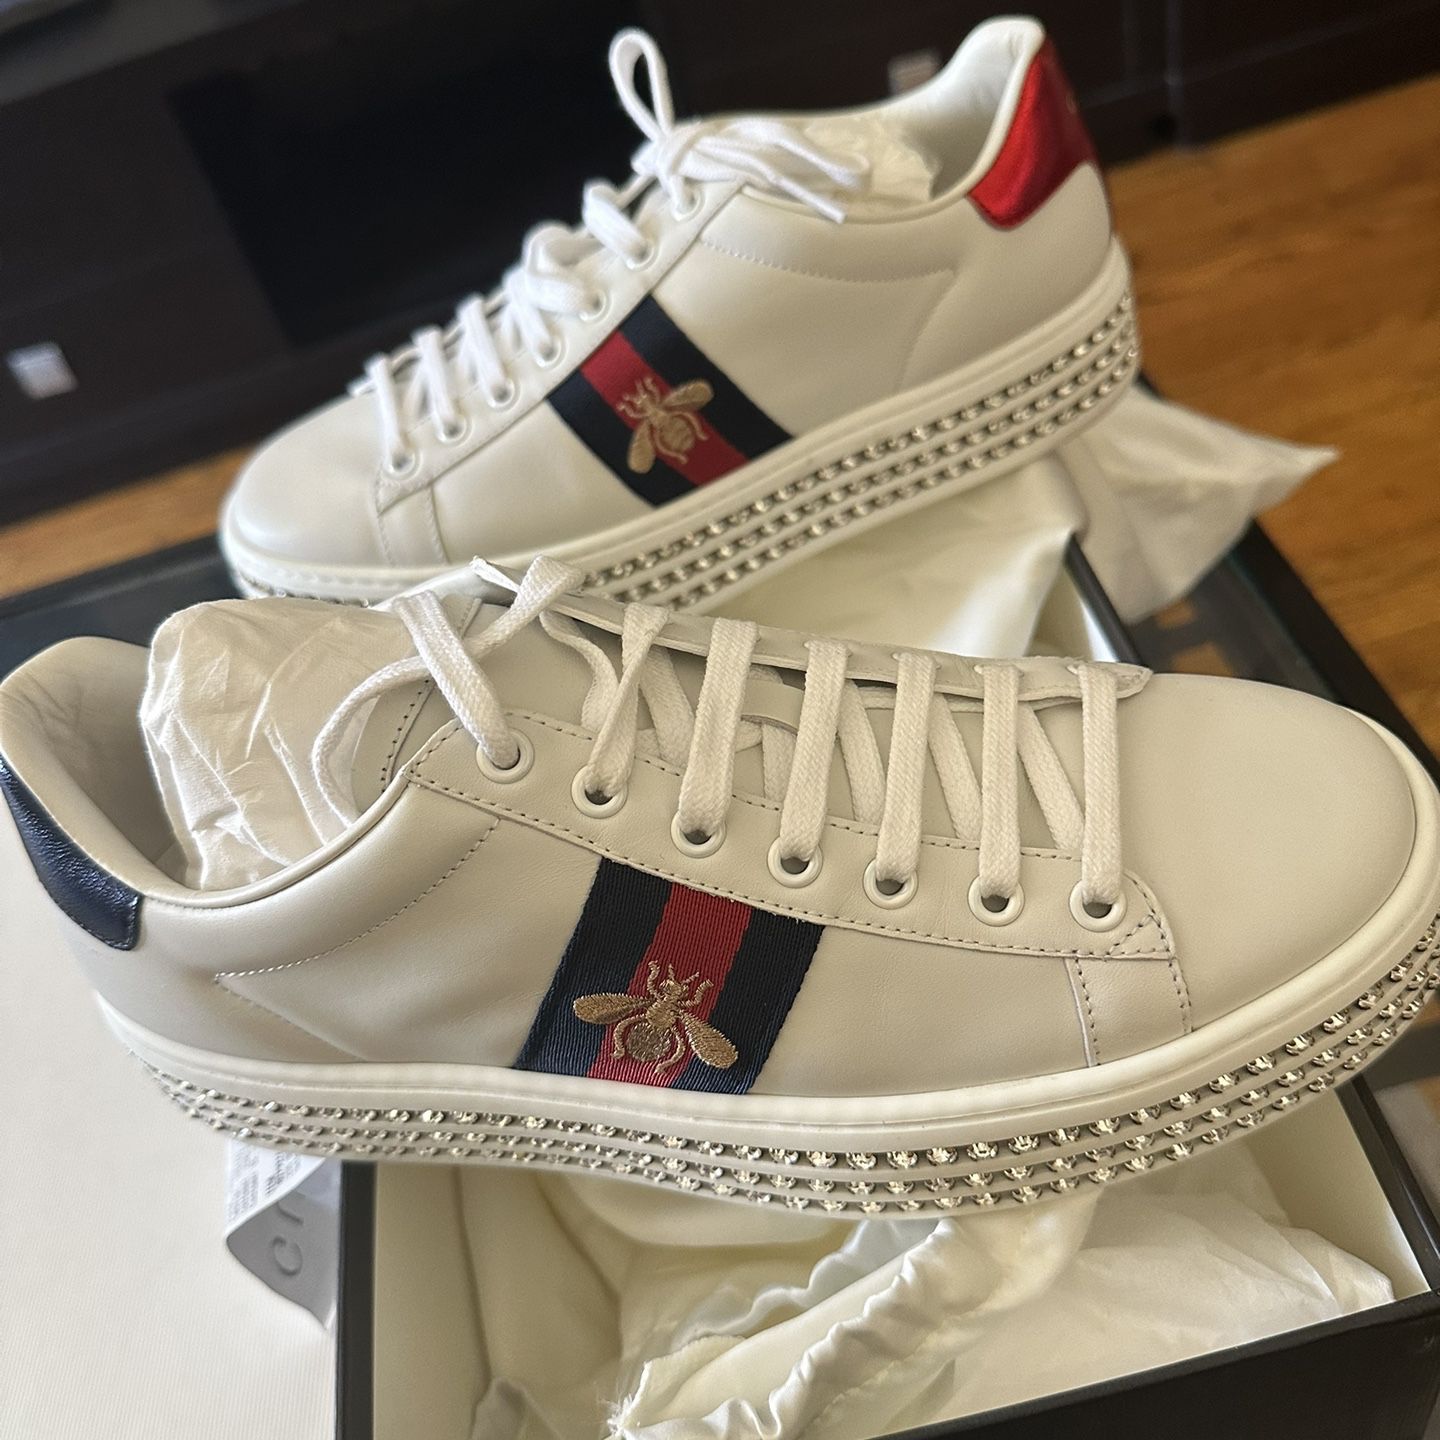 GUCCI SNEAKERS $800